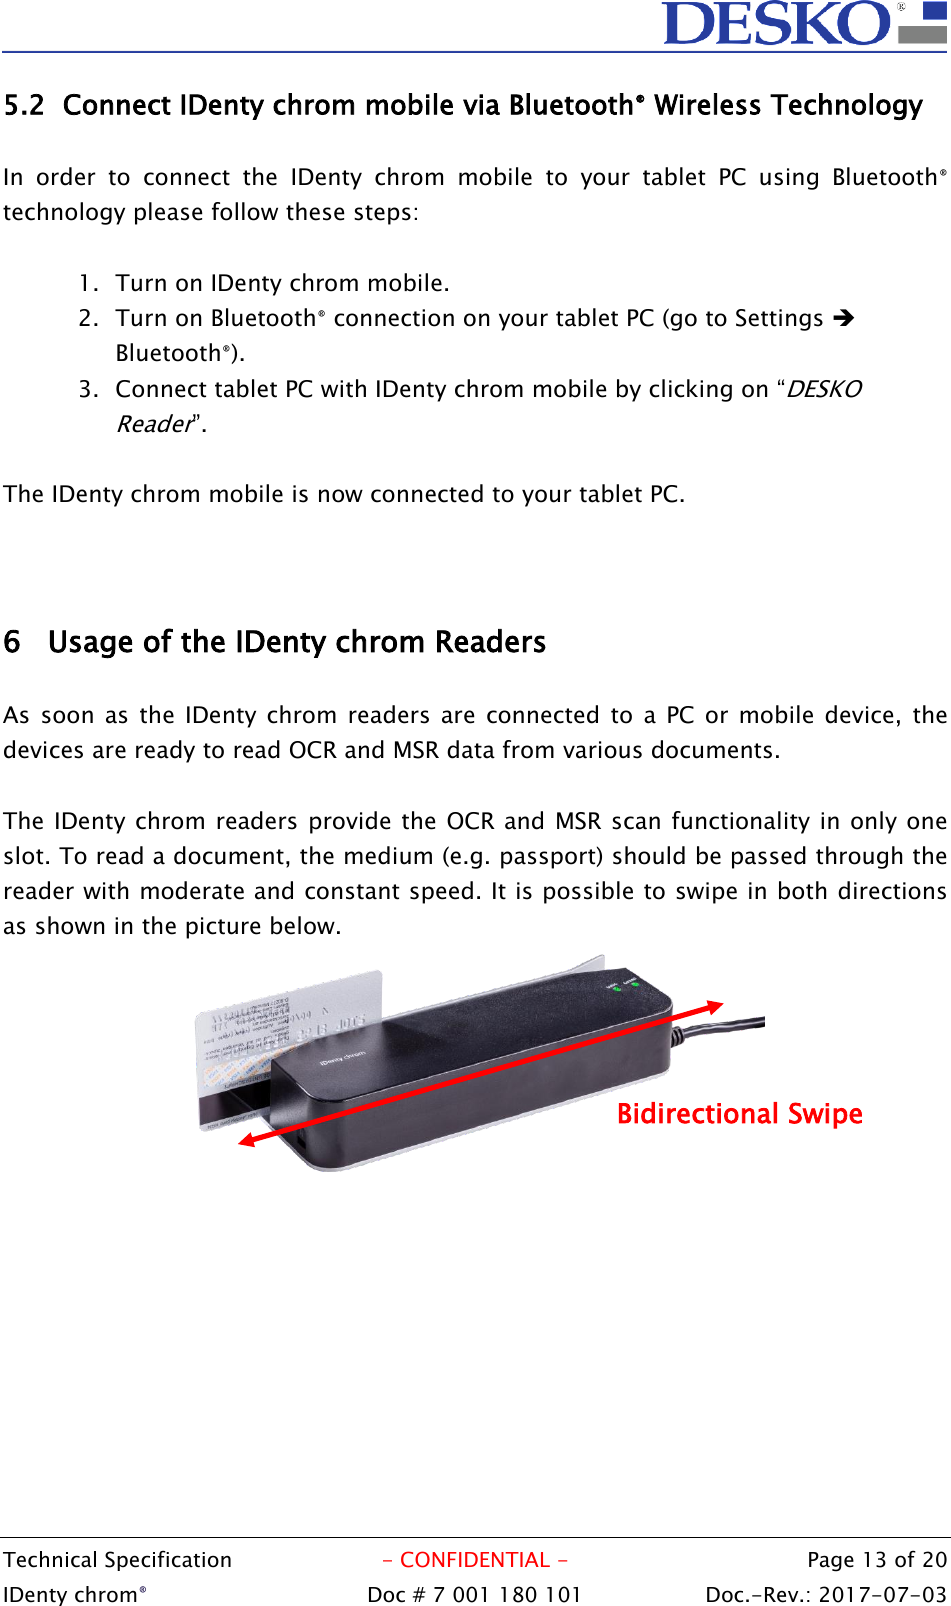  Technical Specification  - CONFIDENTIAL -  Page 13 of 20 IDenty chrom®  Doc # 7 001 180 101   Doc.-Rev.: 2017-07-03   5.2 Connect IDenty chrom mobile via Bluetooth® Wireless Technology  In  order  to  connect  the  IDenty  chrom  mobile  to  your  tablet  PC  using  Bluetooth® technology please follow these steps:  1. Turn on IDenty chrom mobile. 2. Turn on Bluetooth® connection on your tablet PC (go to Settings  Bluetooth®). 3. Connect tablet PC with IDenty chrom mobile by clicking on “DESKO Reader”.  The IDenty chrom mobile is now connected to your tablet PC.    6 Usage of the IDenty chrom Readers  As  soon as  the IDenty chrom  readers  are  connected to  a PC or mobile device,  the devices are ready to read OCR and MSR data from various documents.  The IDenty chrom readers provide the OCR and MSR scan functionality in only one slot. To read a document, the medium (e.g. passport) should be passed through the reader with moderate and constant speed. It is possible to swipe in both directions as shown in the picture below.  Bidirectional Swipe 